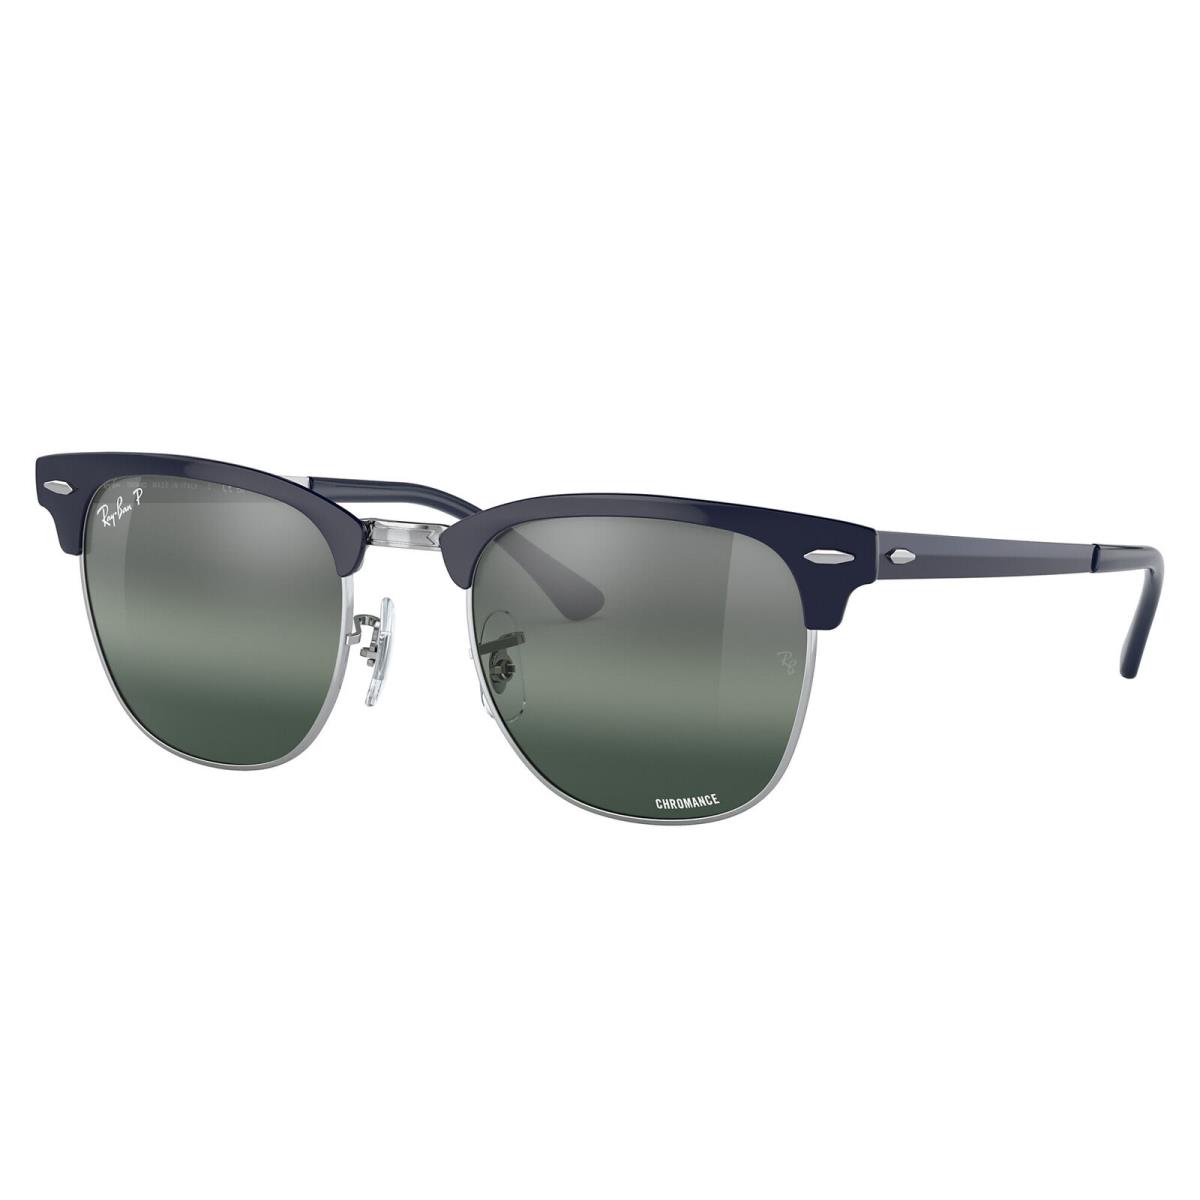 Ray-ban RB3716 Clubmaster Metal Sunglasses Silver On Blue : RB3716-9254G6-51